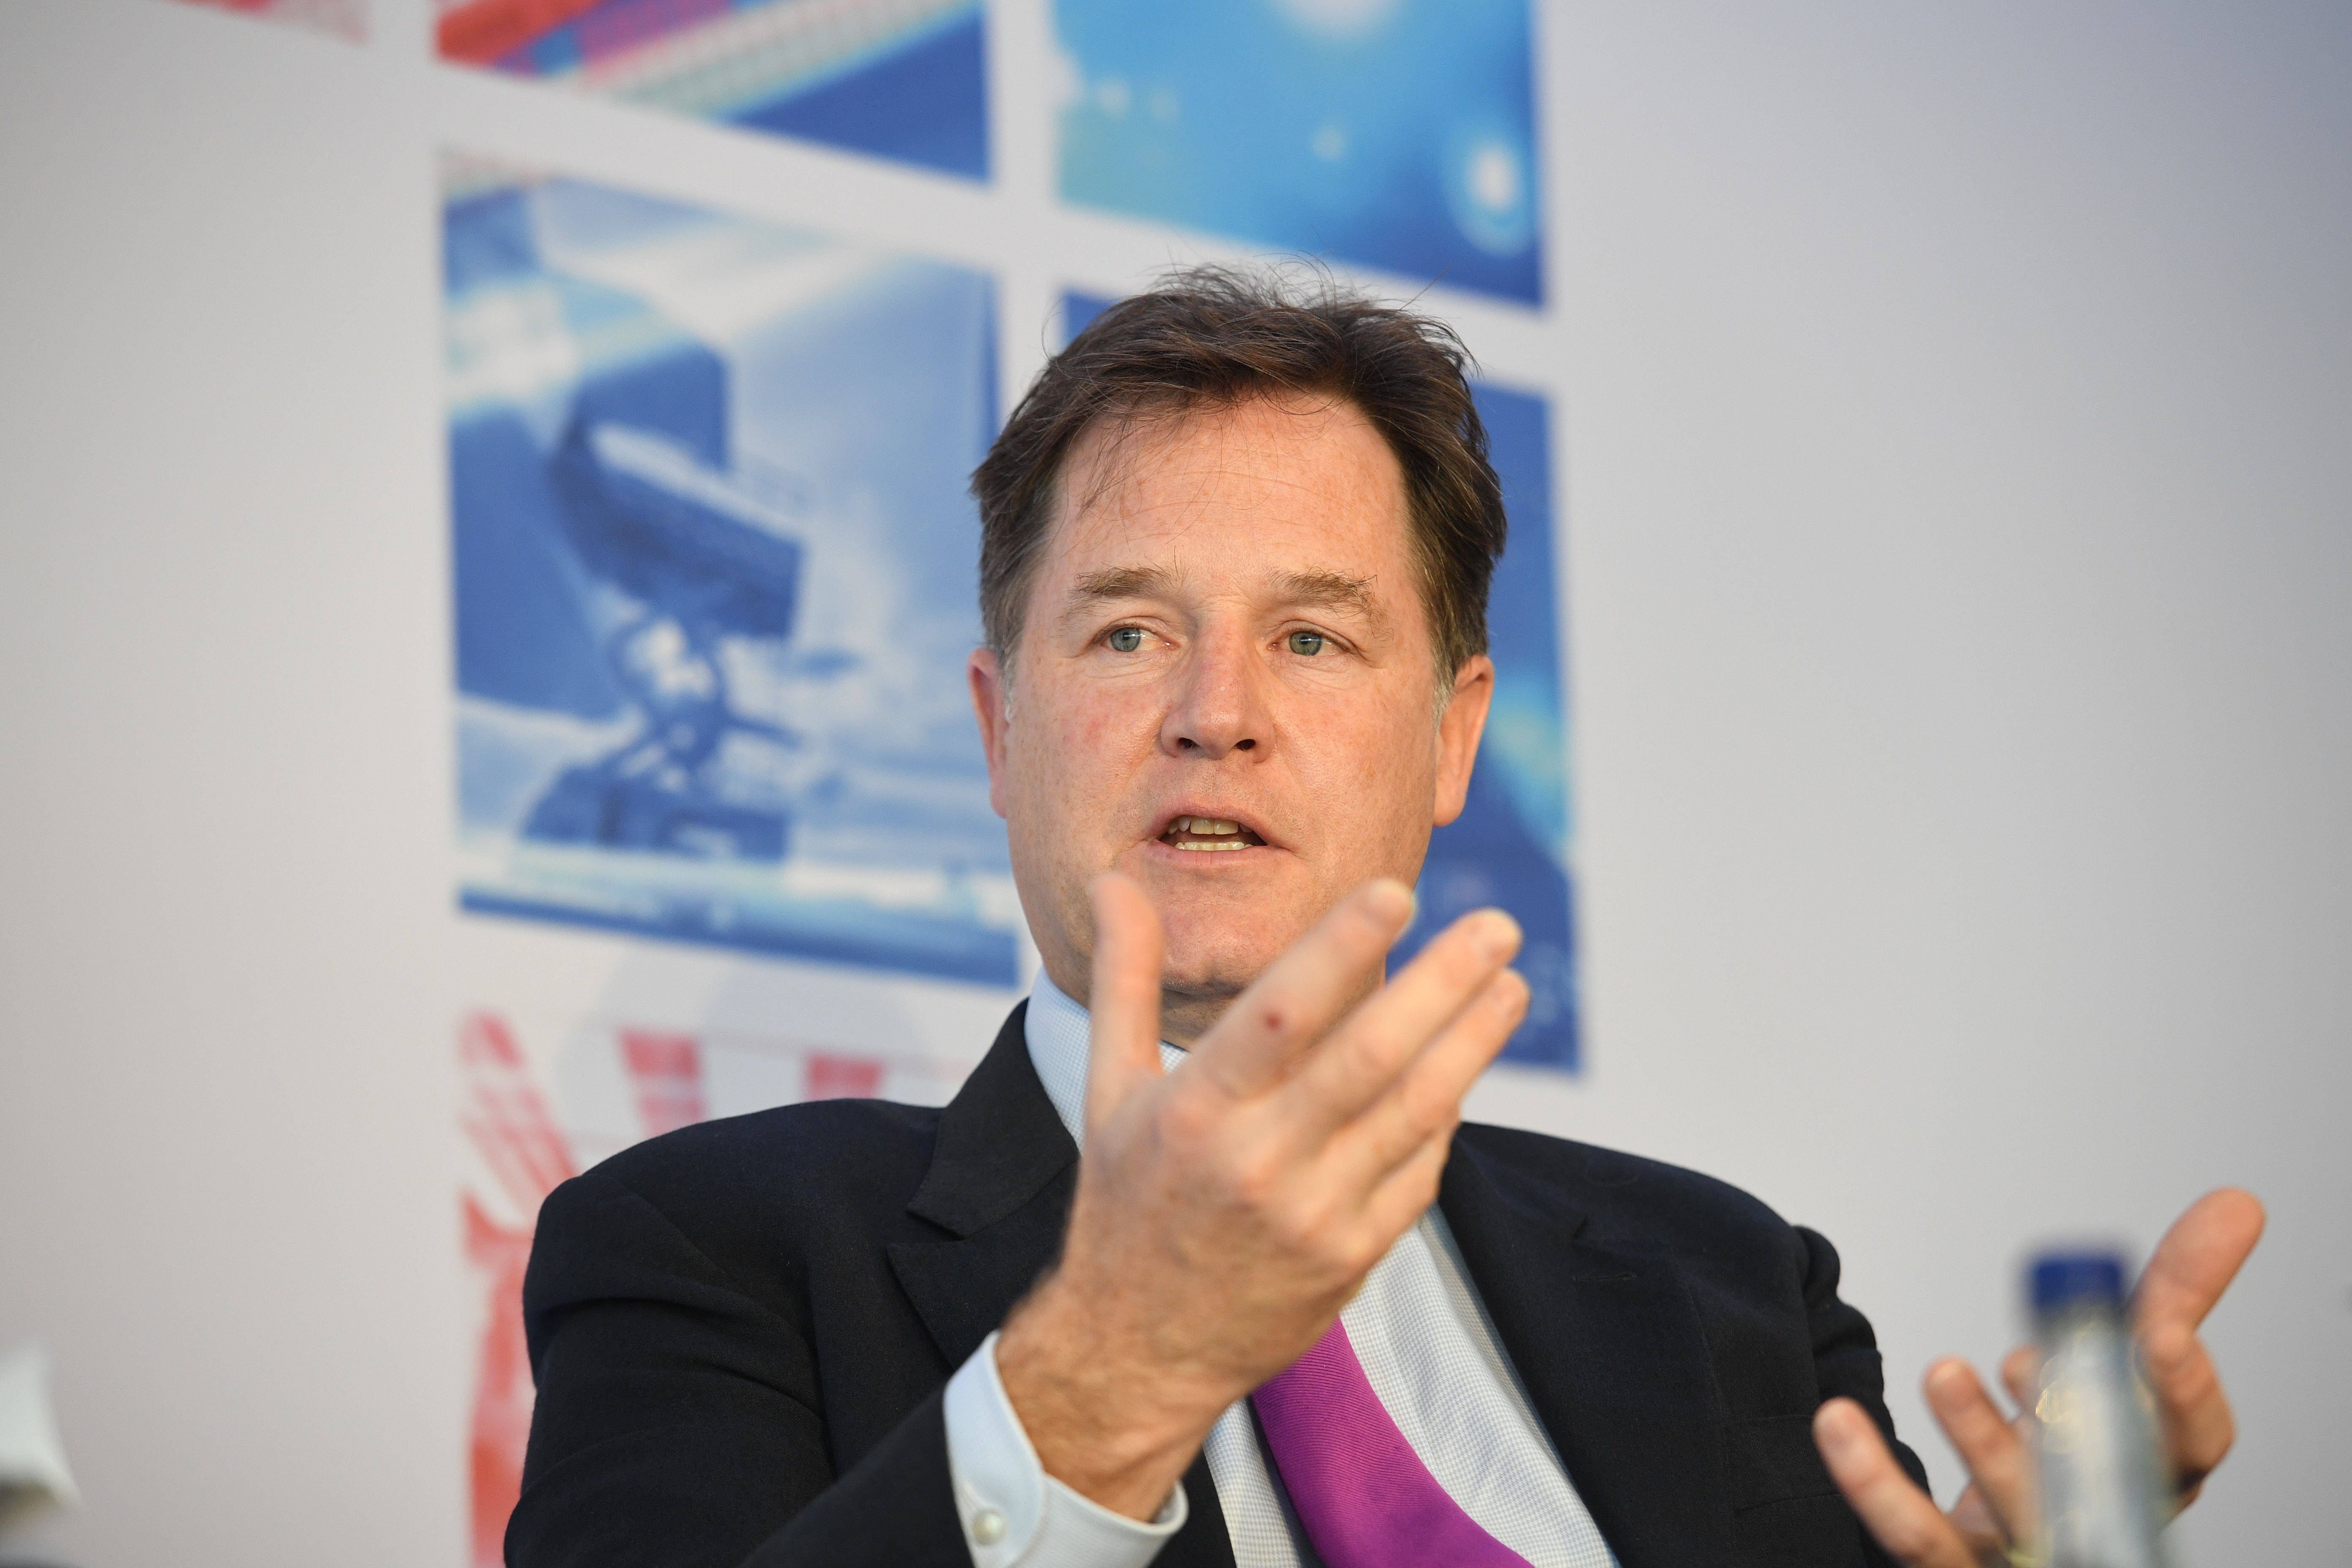 Former deputy prime minister Sir Nick Clegg has been promoted by Facebook’s Mark Zuckerberg to a new role focused on regulation which puts him at the same level of seniority as the firm’s founder (Stefan Rousseau/PA)